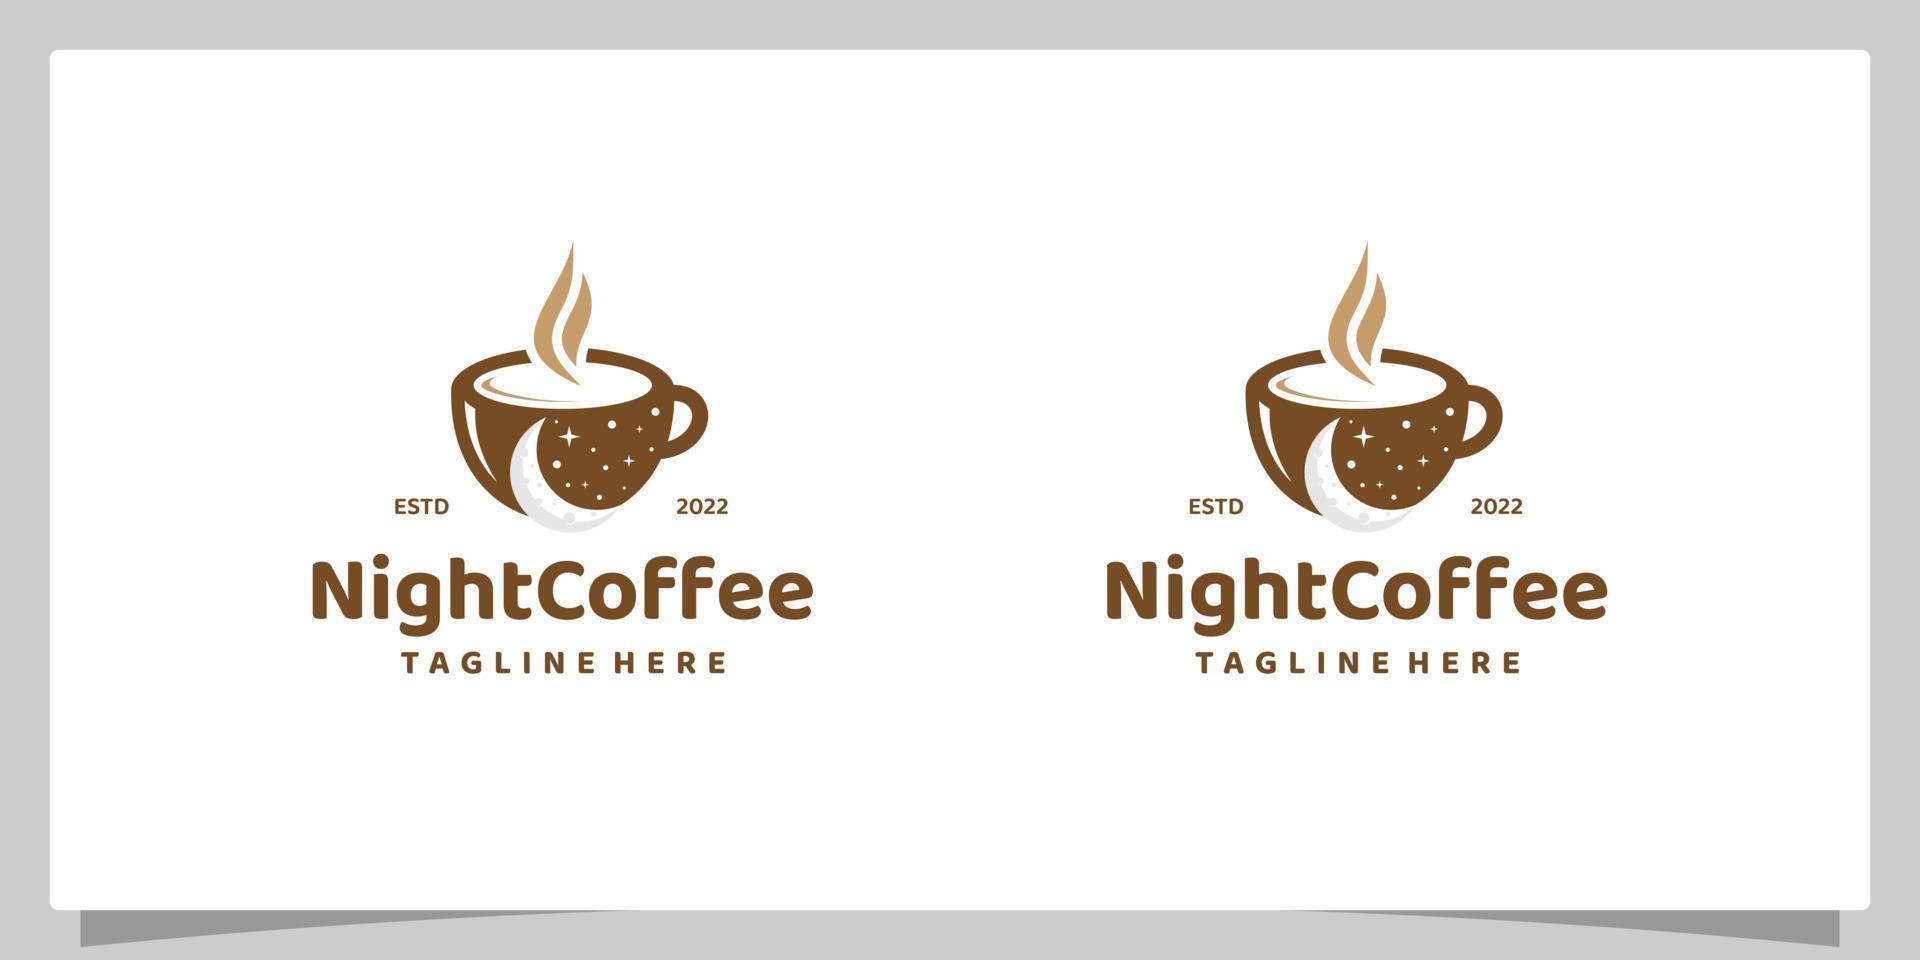 Vintage Cup Coffee Logo design template with moon in negative space design logo. Coffee night, coffee cafe logo illustration design template vector